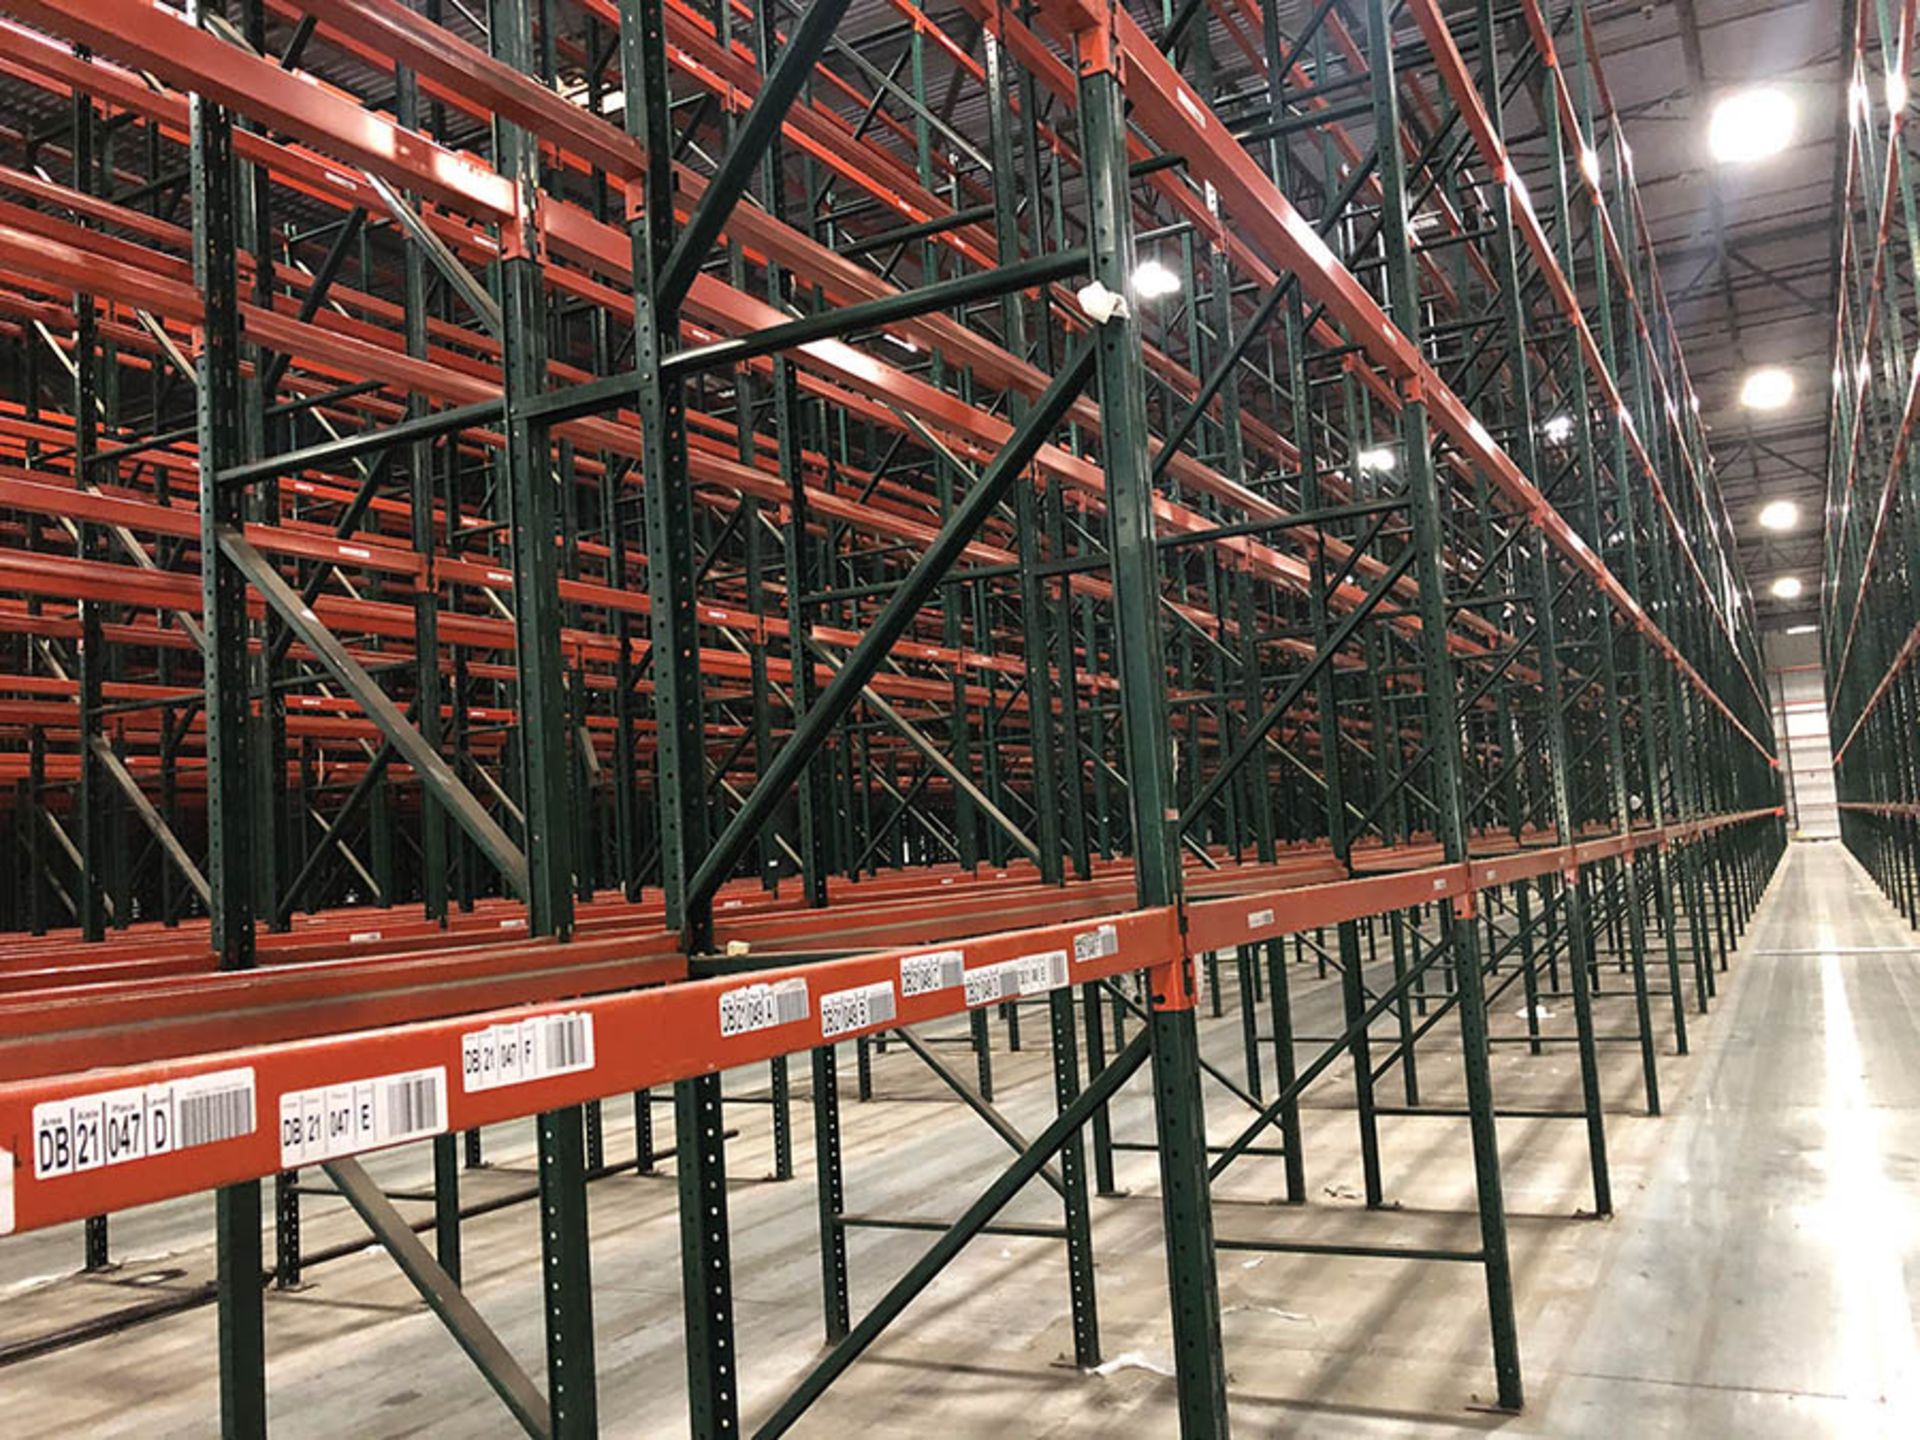 (31) BAYS/SECTIONS OF RIDG-U-RAK PALLET RACKING, CONSISTING OF (32) TOTAL UPRIGHTS- (2) UPRIGHTS ARE